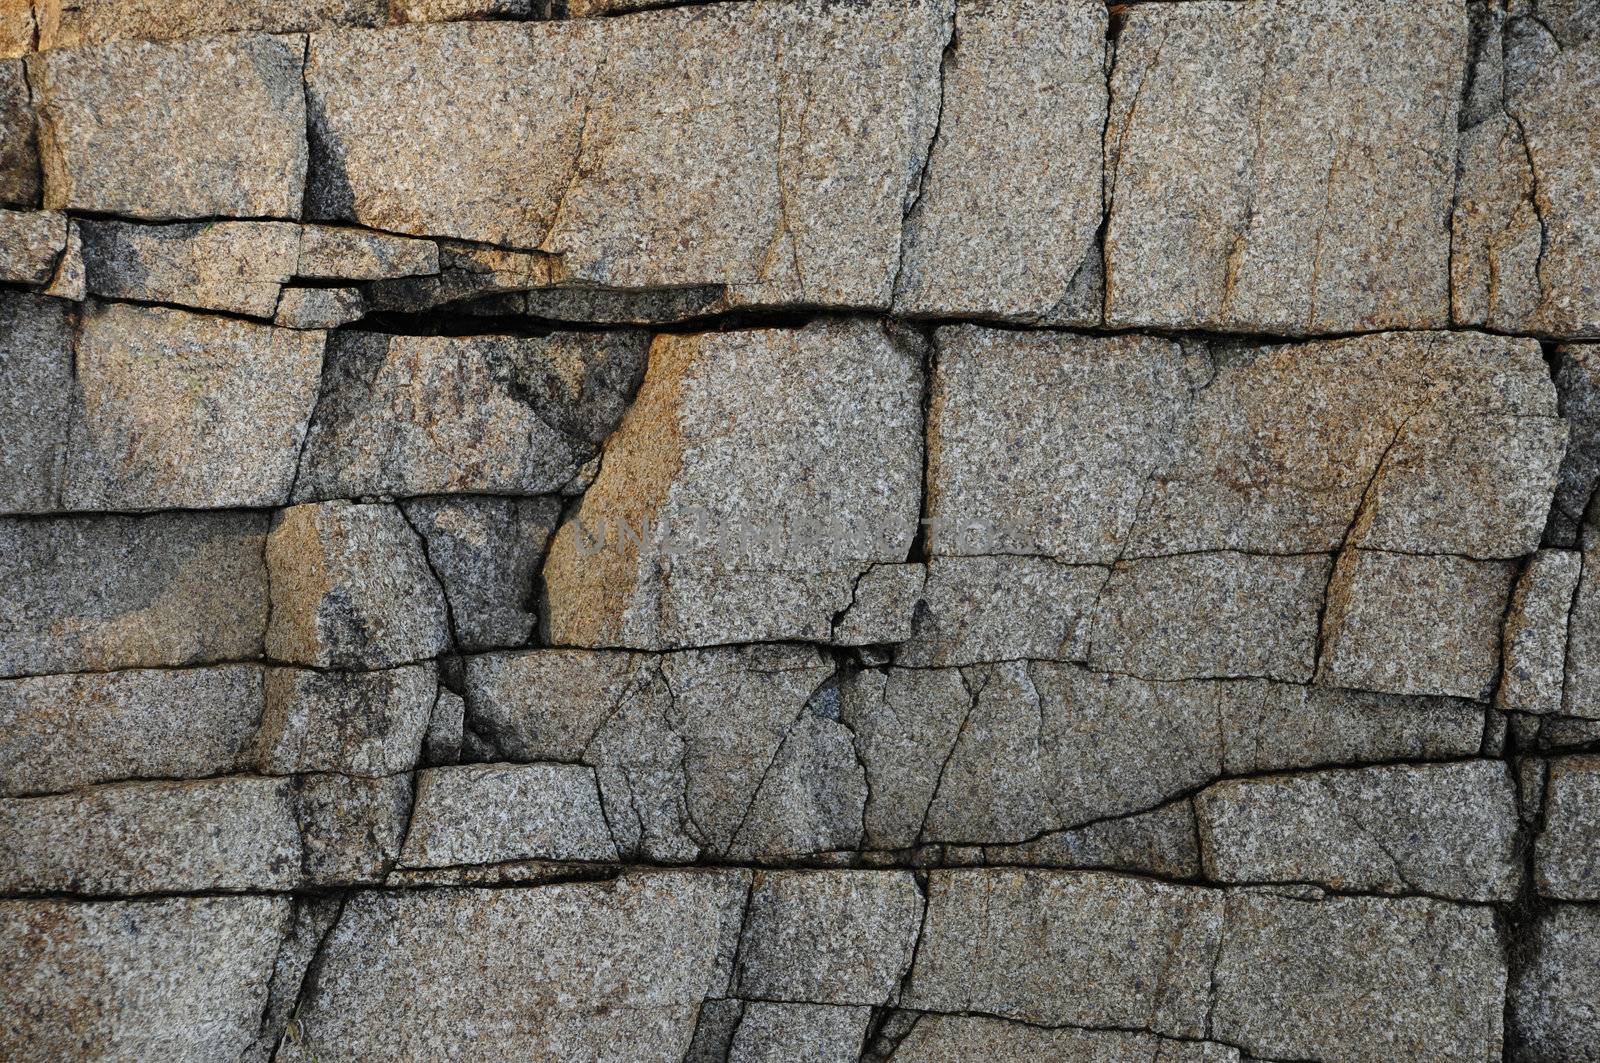 Deeply cracked granite rock surface texture